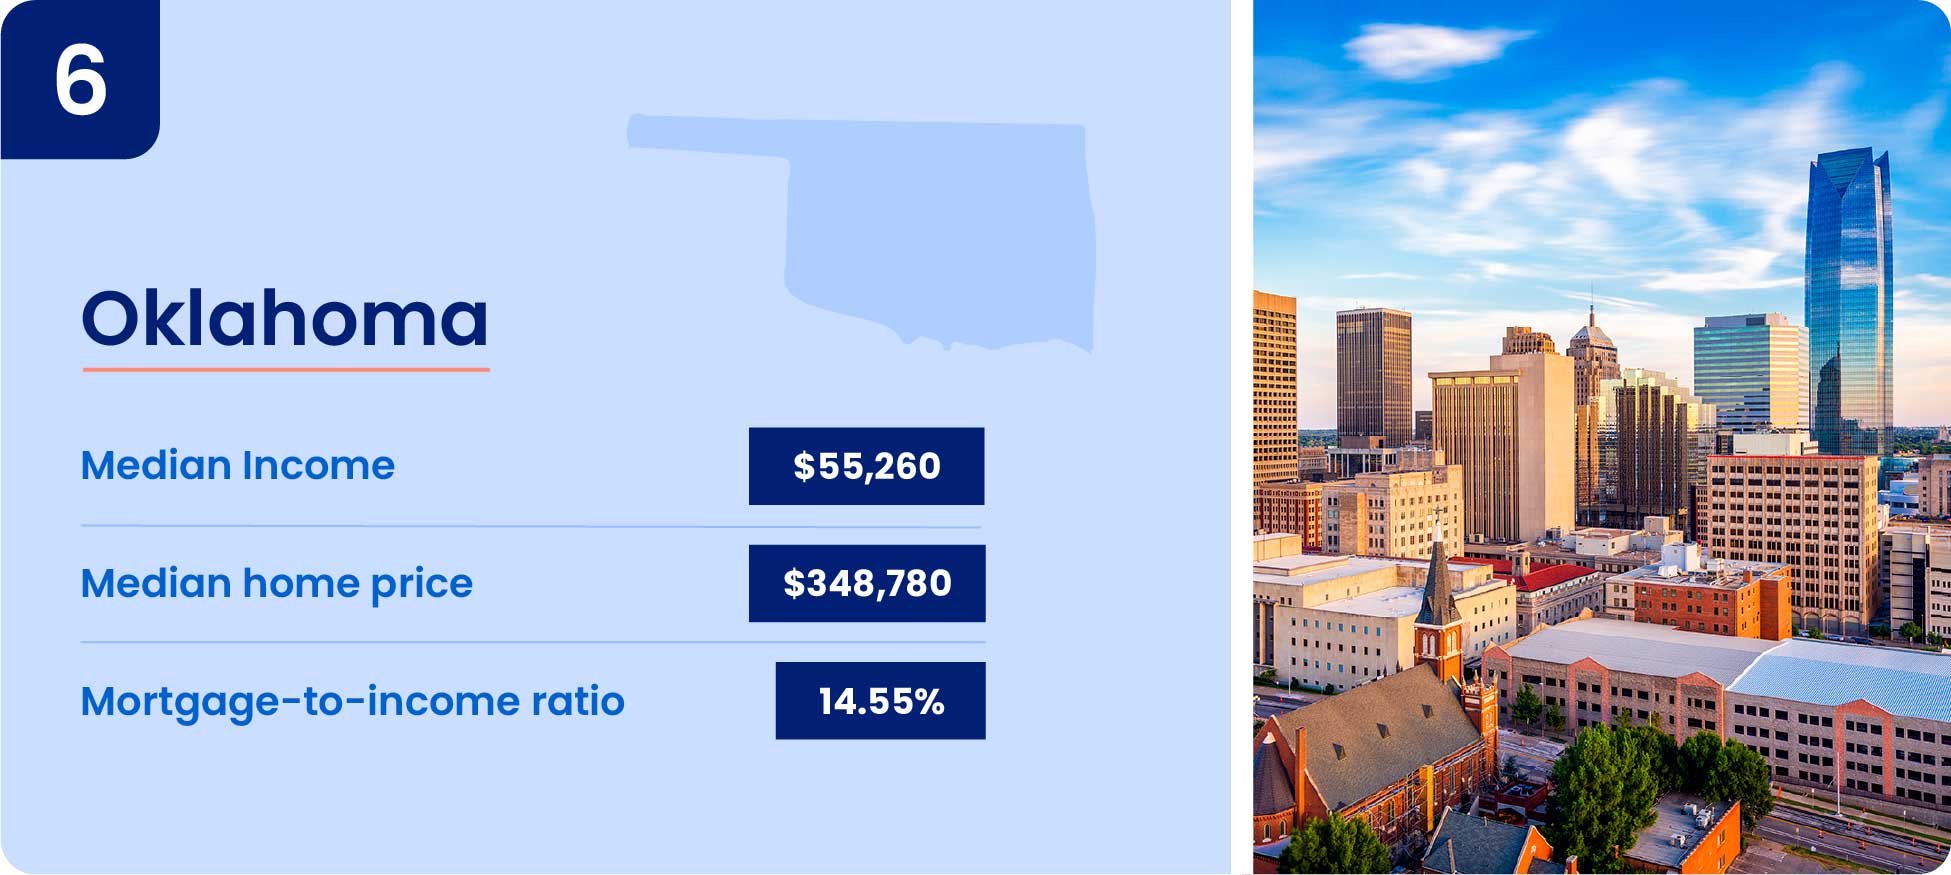 Image shows why one of the cheapest states to buy a house is Oklahoma.